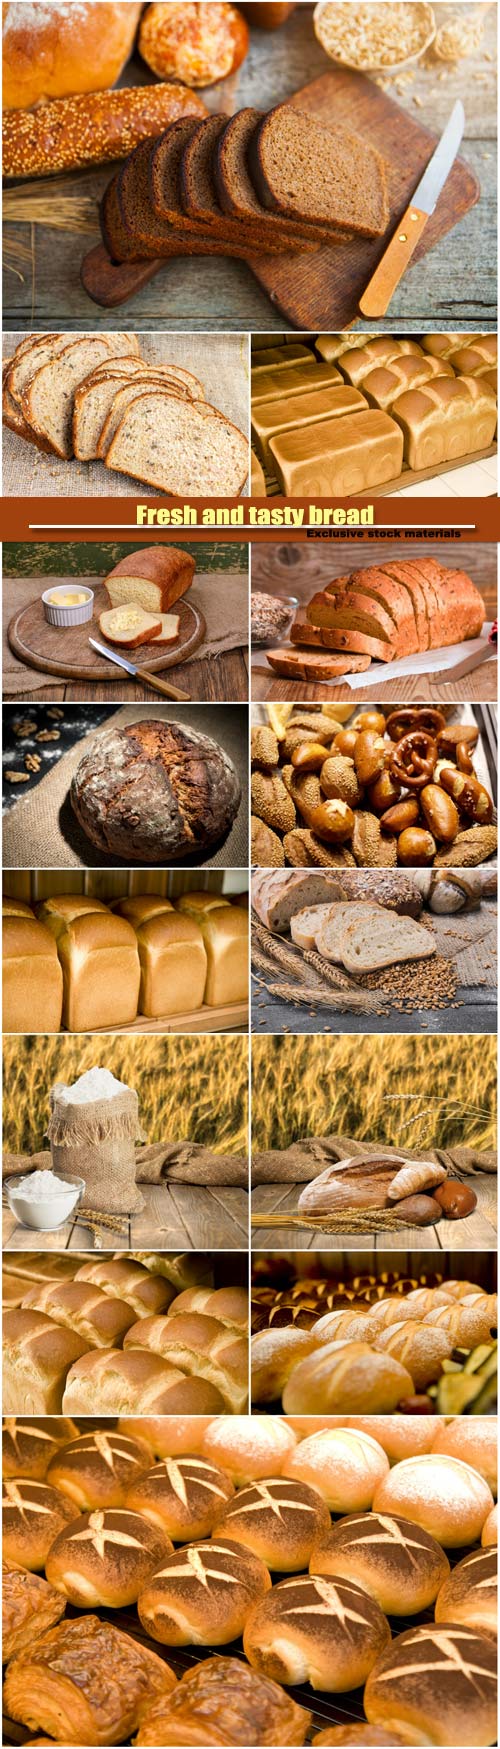 Fresh and tasty bread, various pastry and bakery